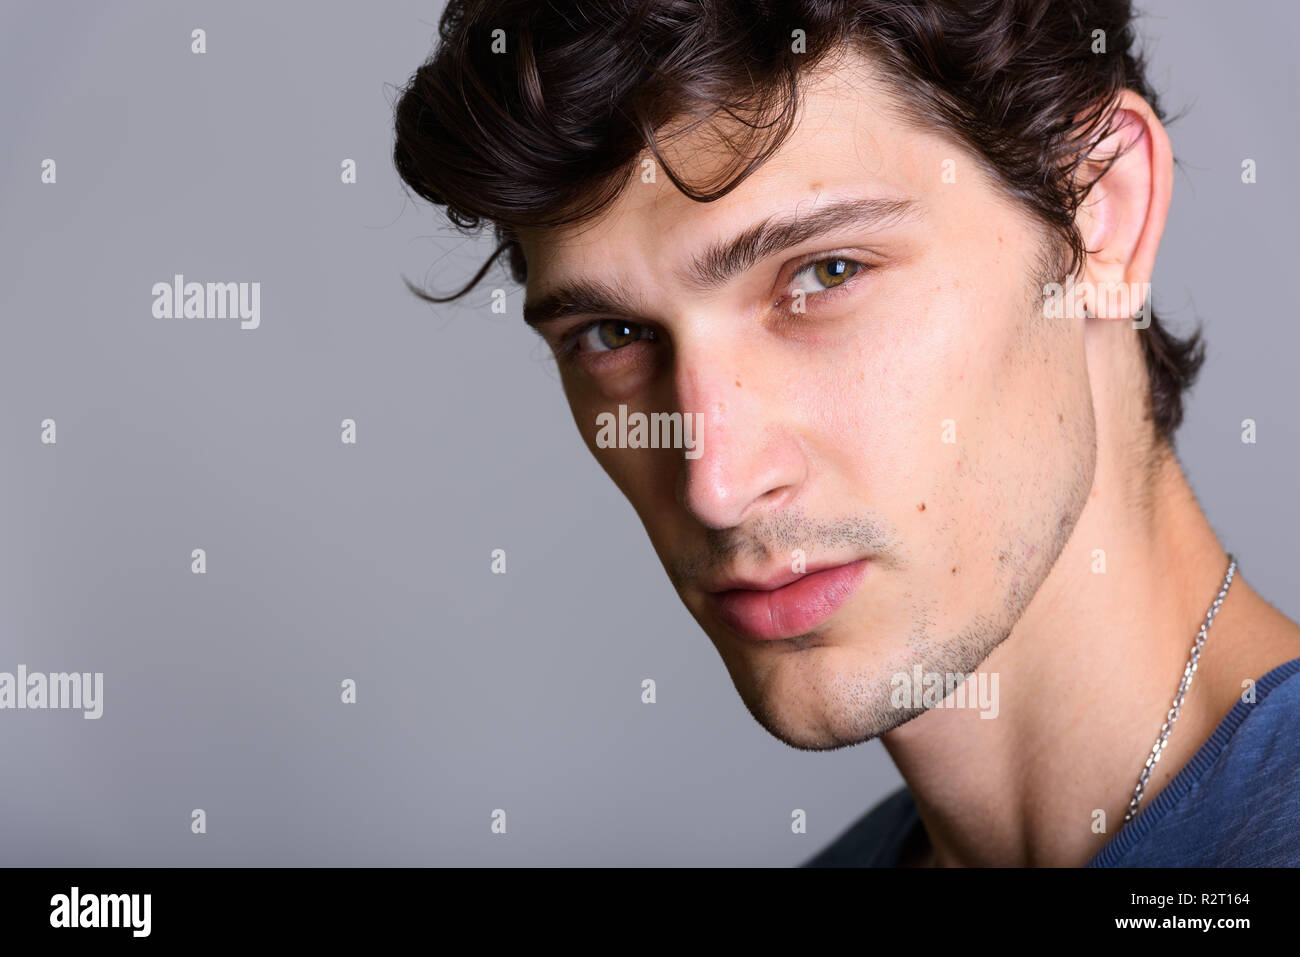 Close up of young handsome Hispanic man against gray background Stock Photo